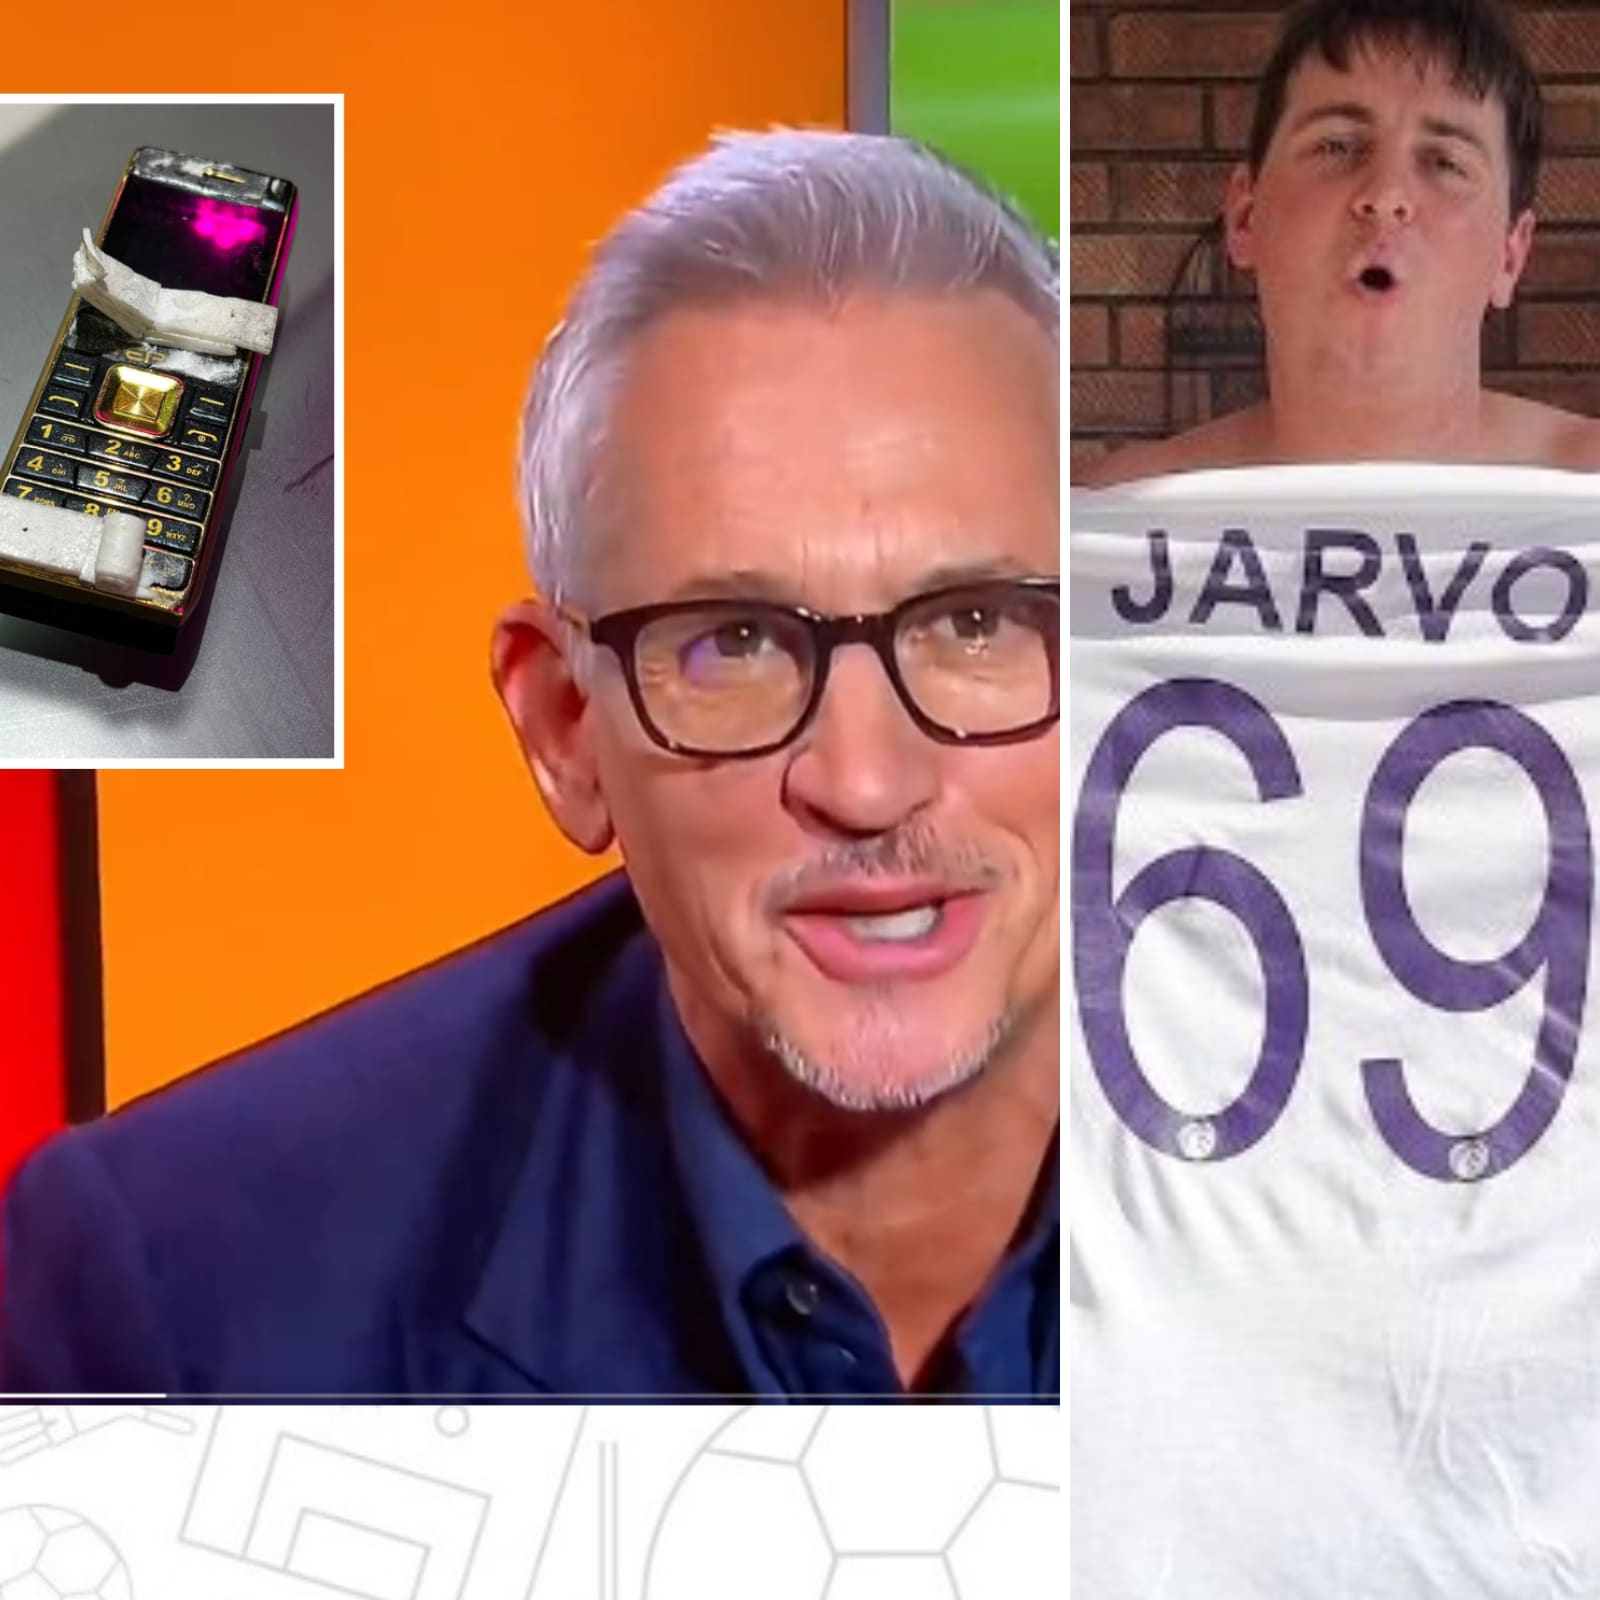 Kichha Sex - Remember Jarvo69? Youtuber Claims Responsibility for Sex Noises During  Football Broadcast; BBC Apologises for Porn Audio - News18